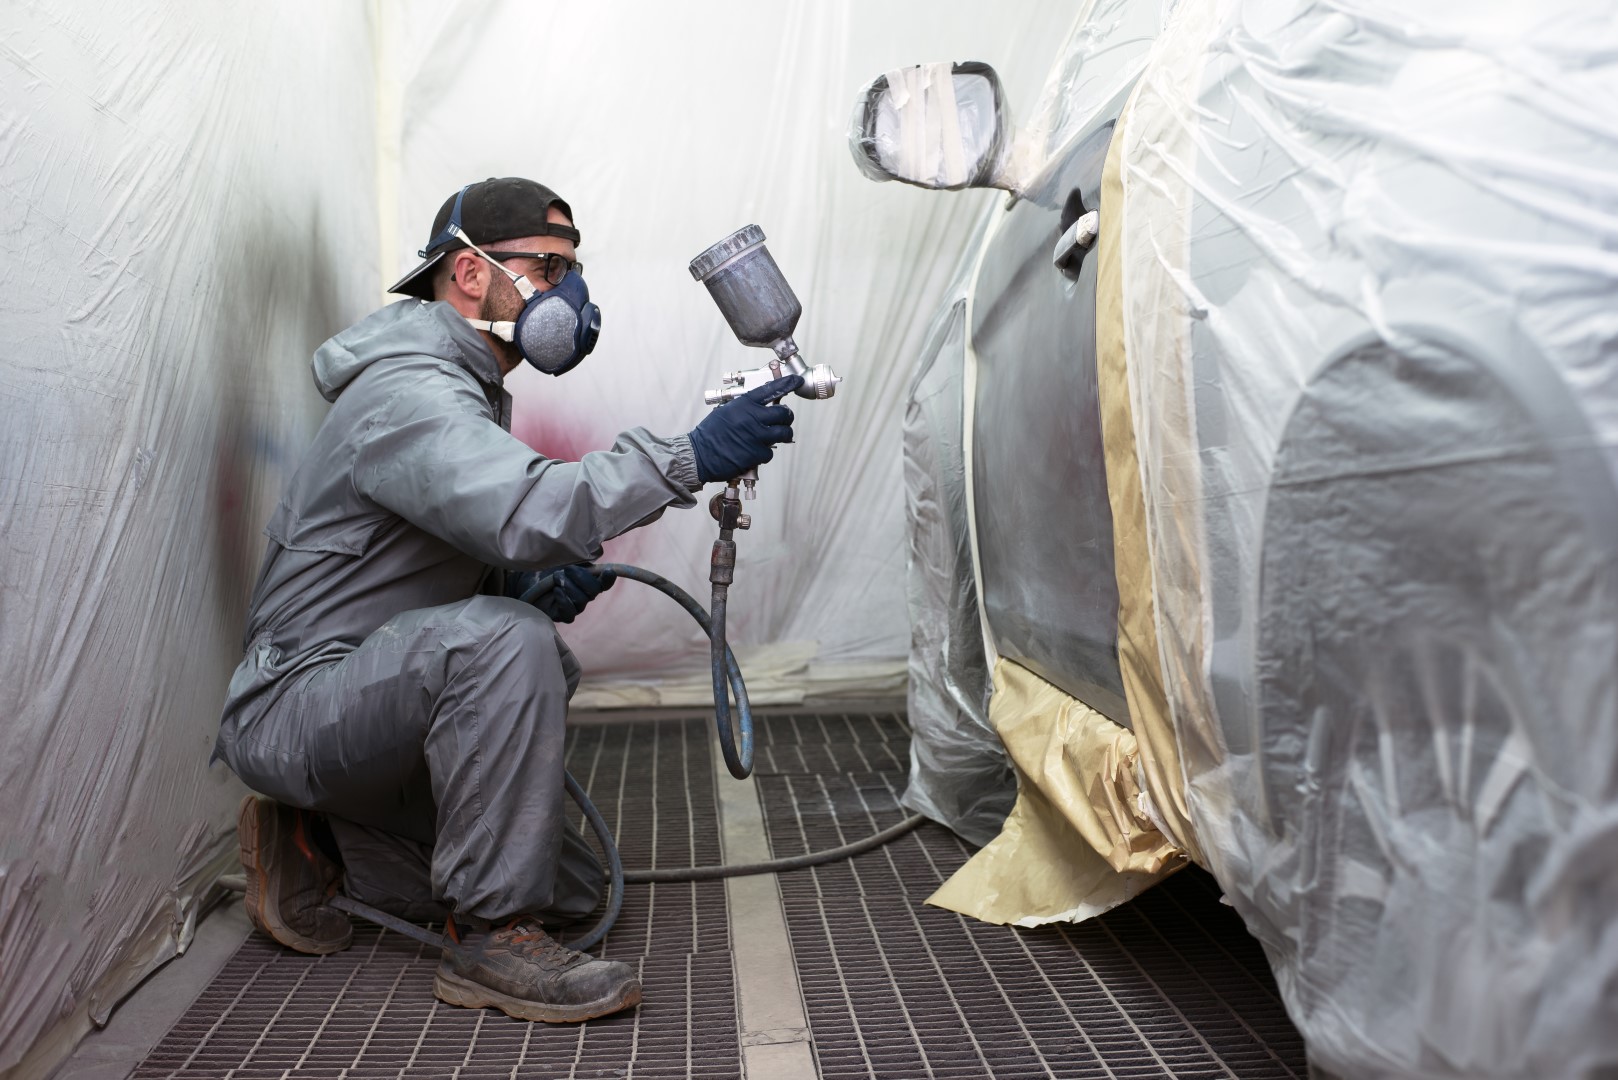 Car painter painting a car door with a mask on, gloves and work clothes